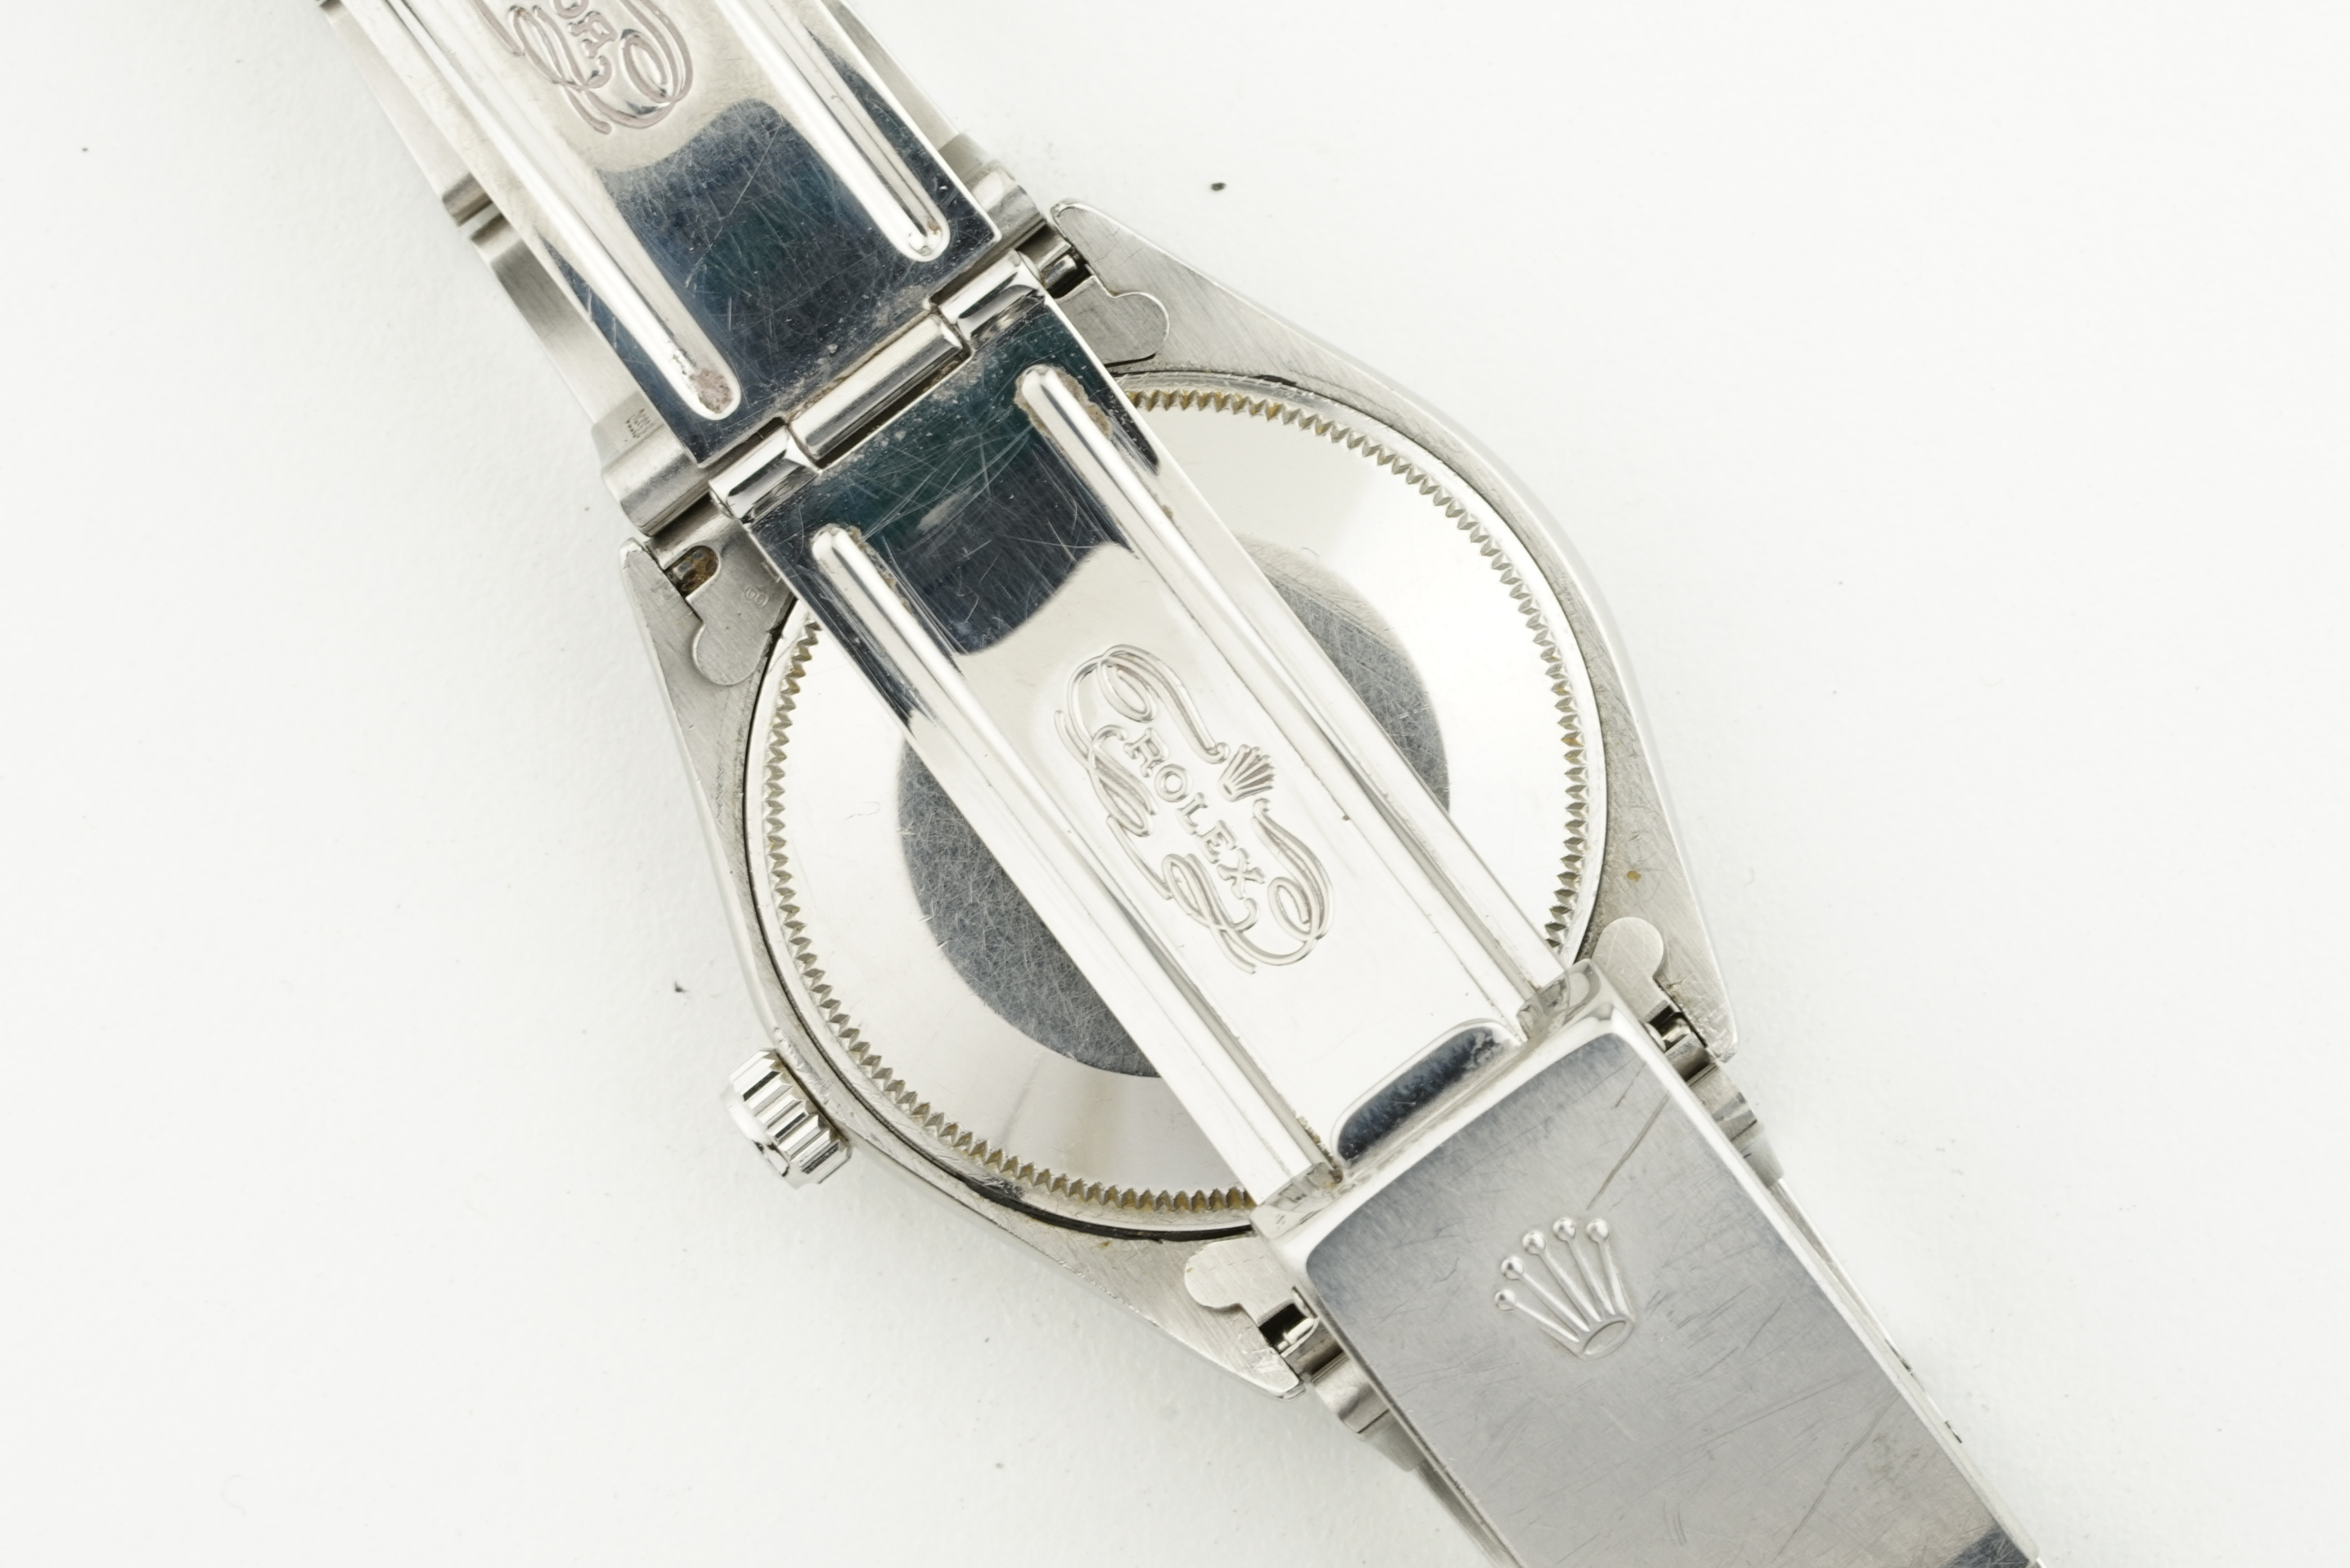 ROLEX OYSTER PERPETUAL AIR-KING PRECISION REF. 5500 CIRCA 1971 - Image 2 of 2